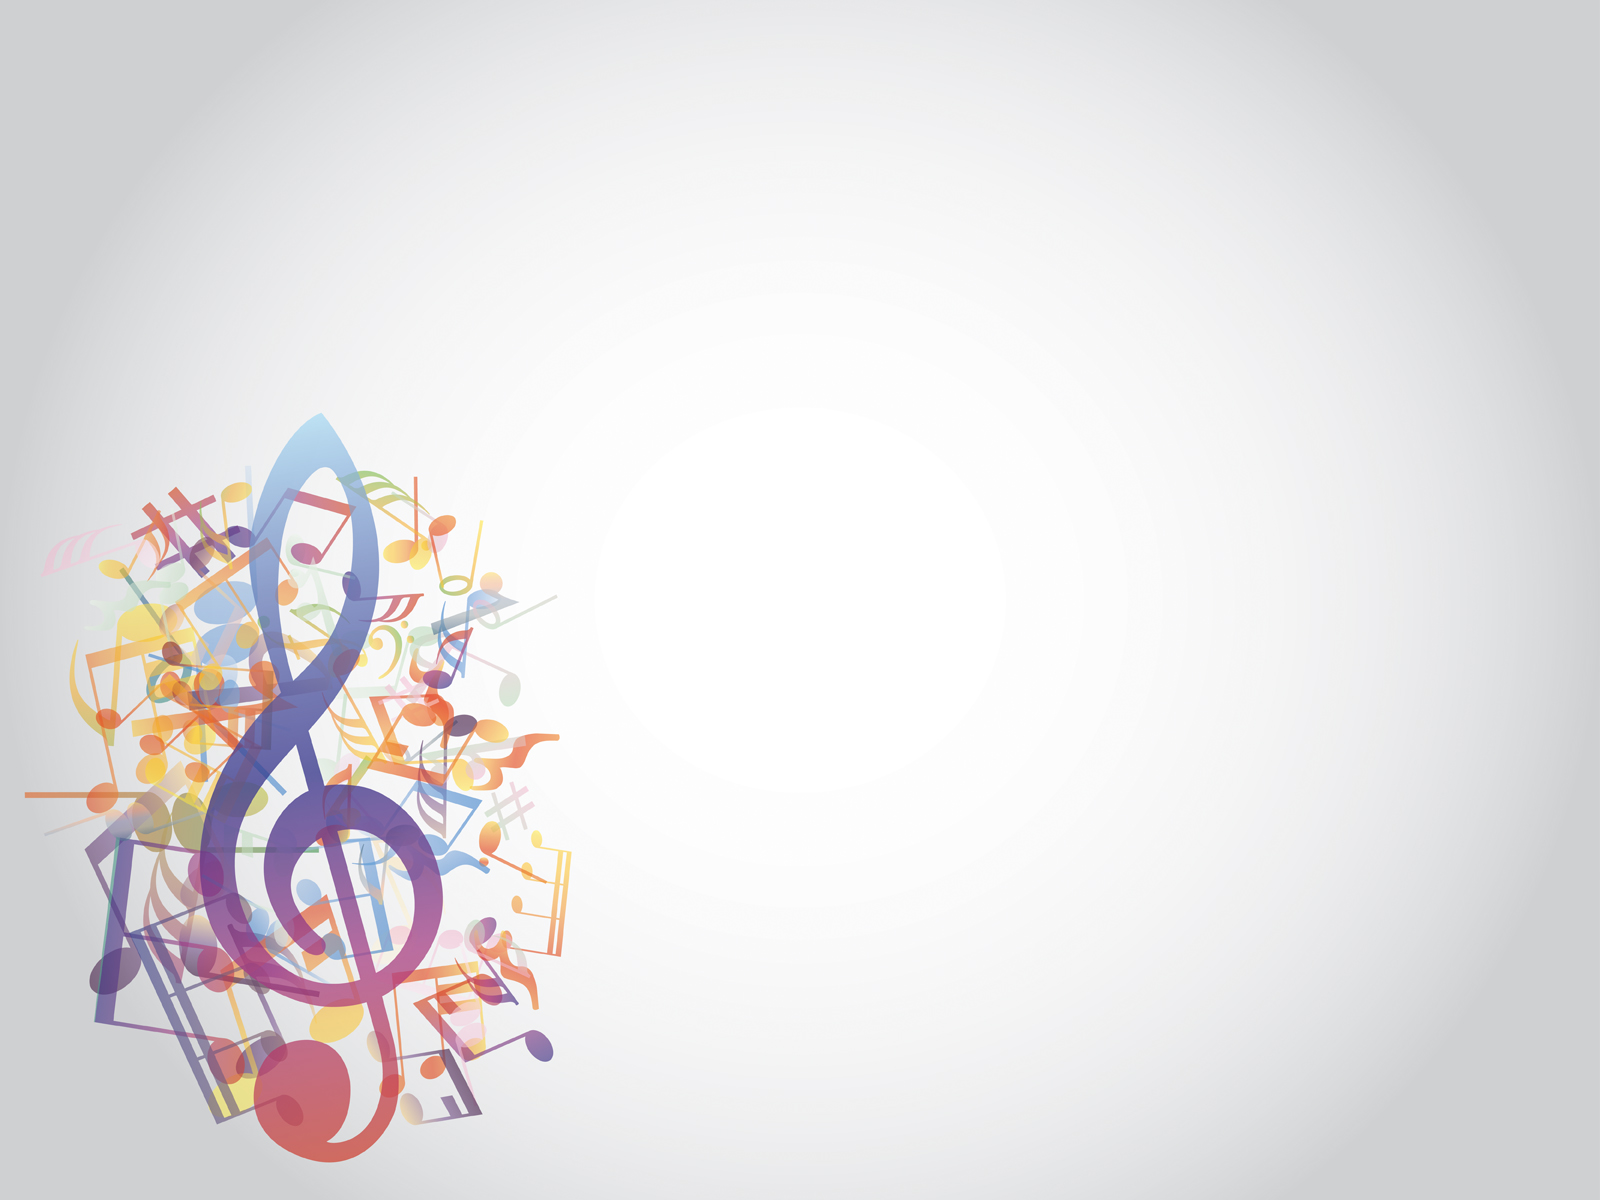 Music Background Backgrounds → Music Gallery